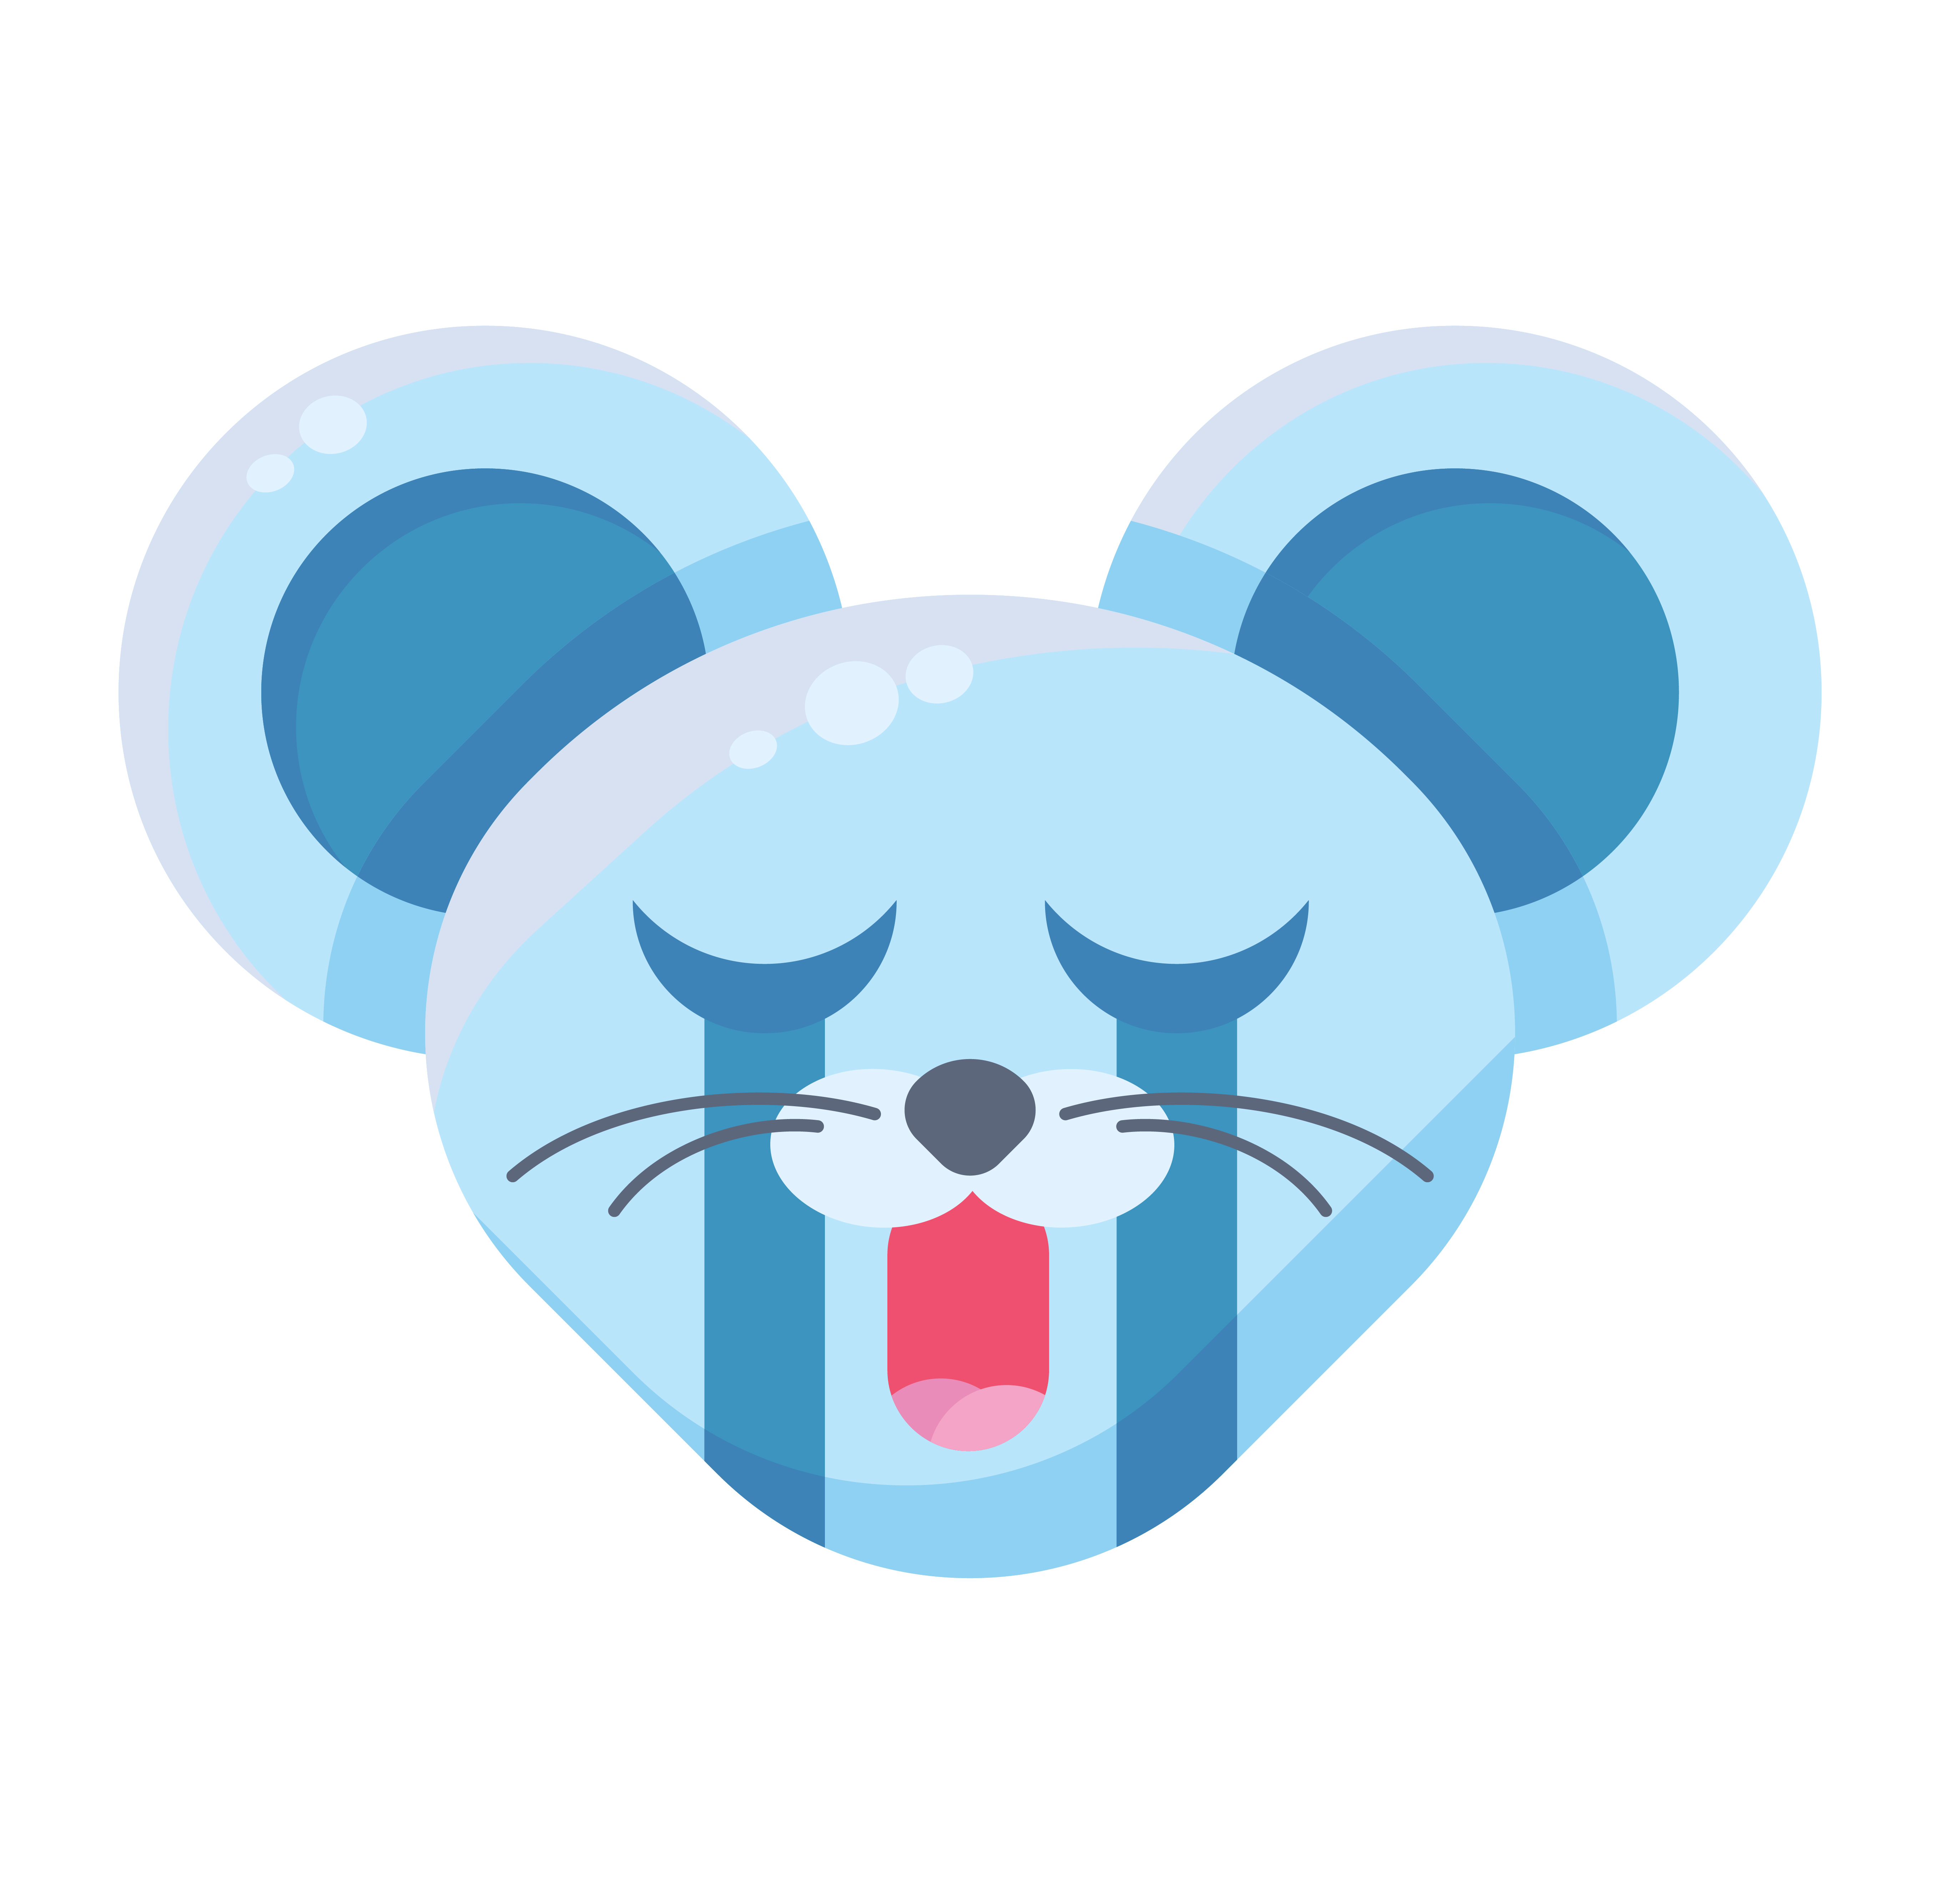 Emoji Cute Funny Animal Mouse Crying Expression 3185682 Vect